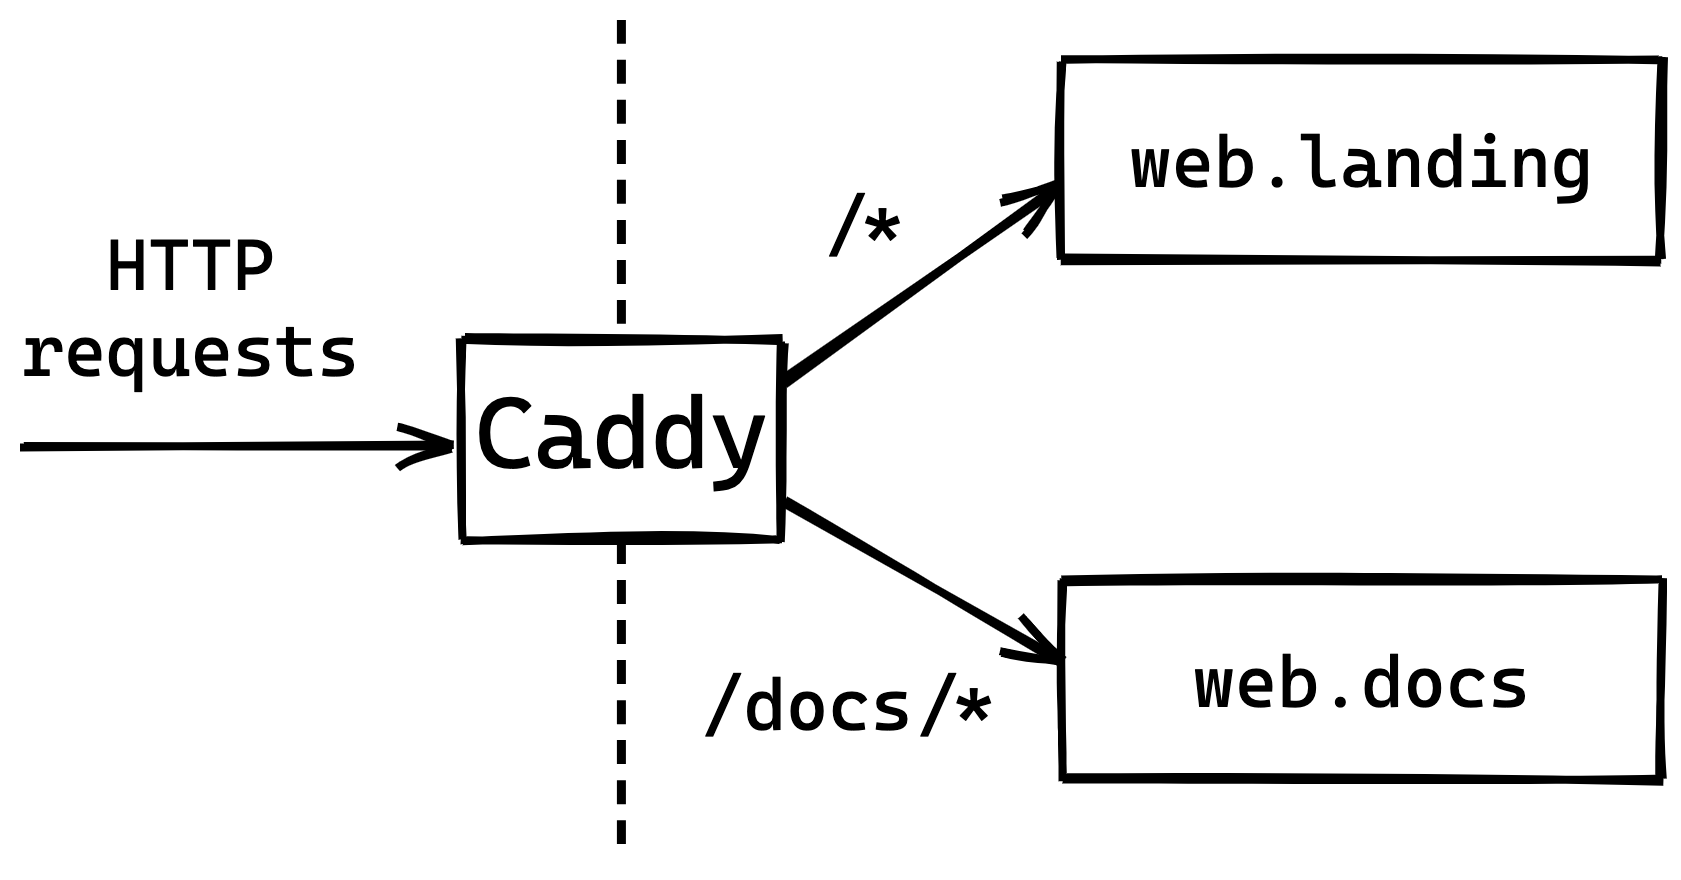 A boxes and arrows diagram showing a Caddy server on the edge of the network proxying requests to either web.landing or web.docs depending on the request